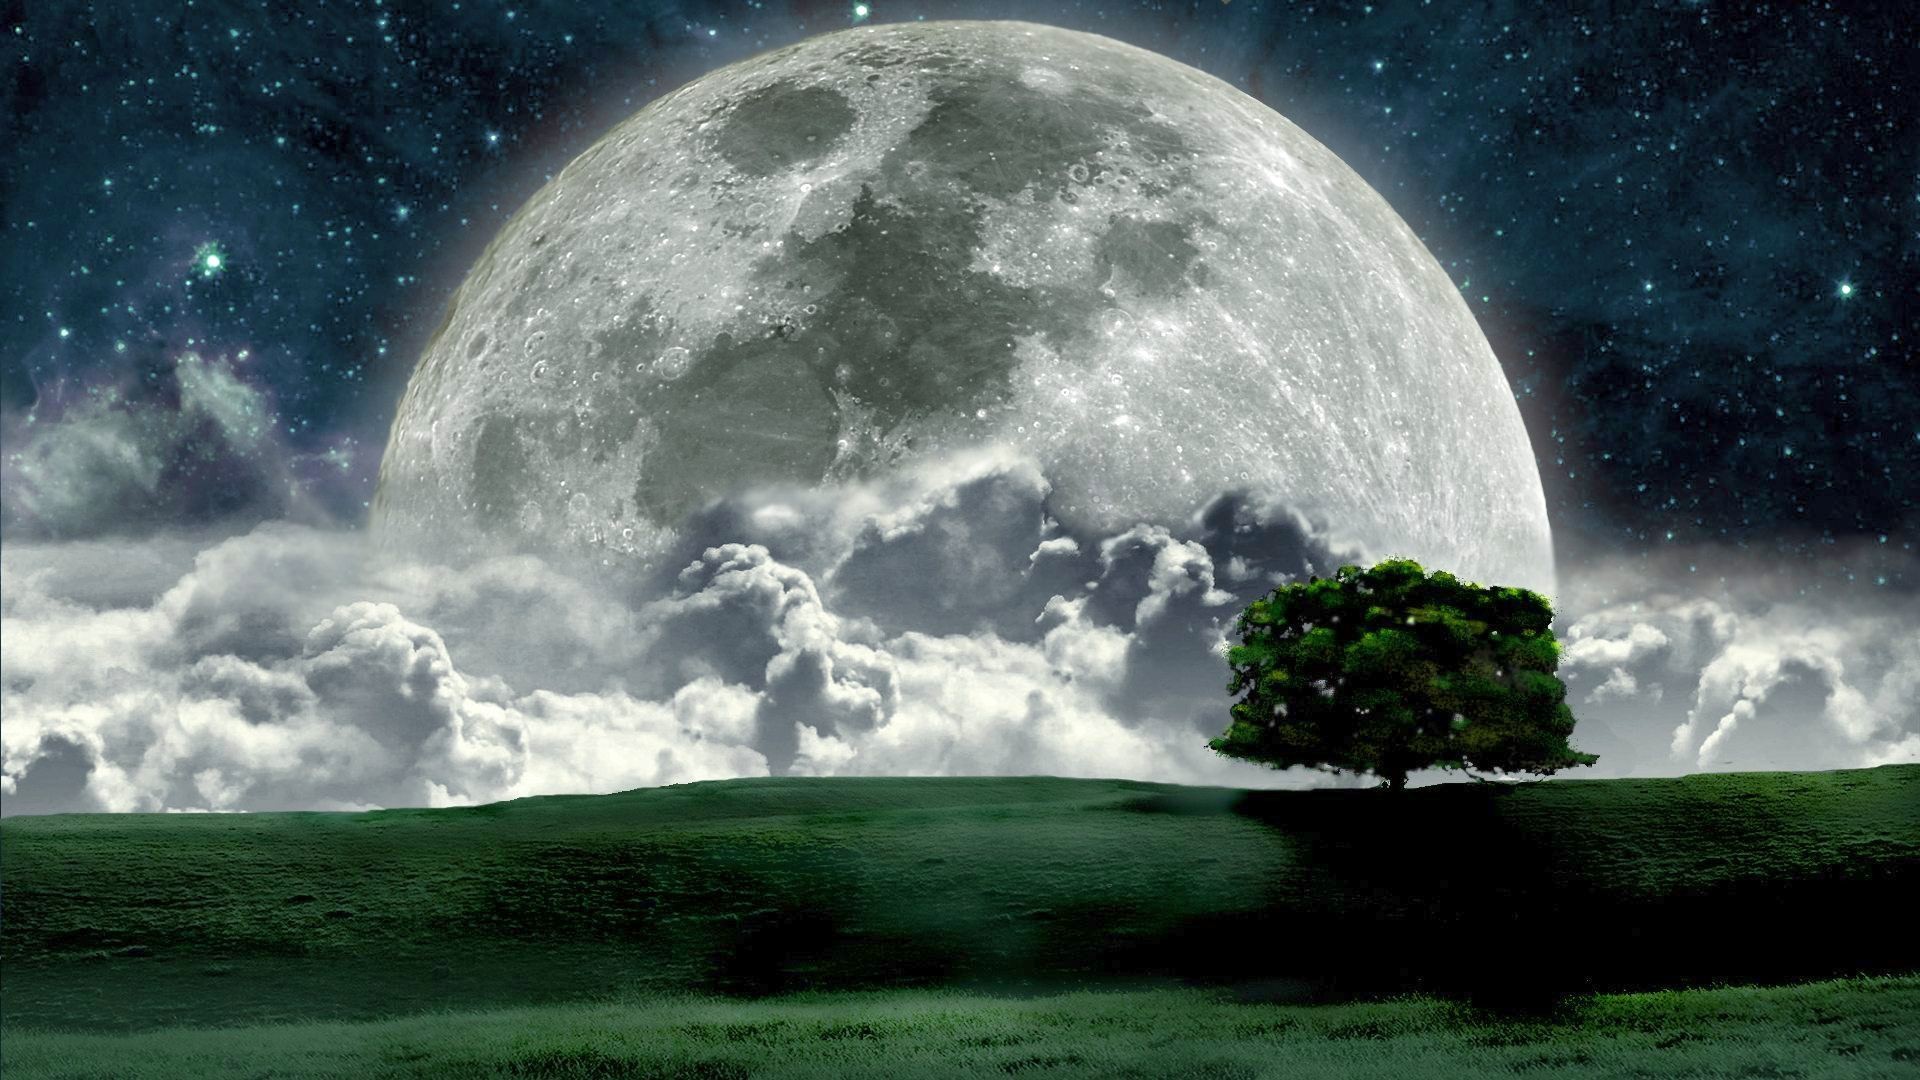 1920x1080 Search Results for “beautiful full moon wallpapers” – Adorable Wallpapers